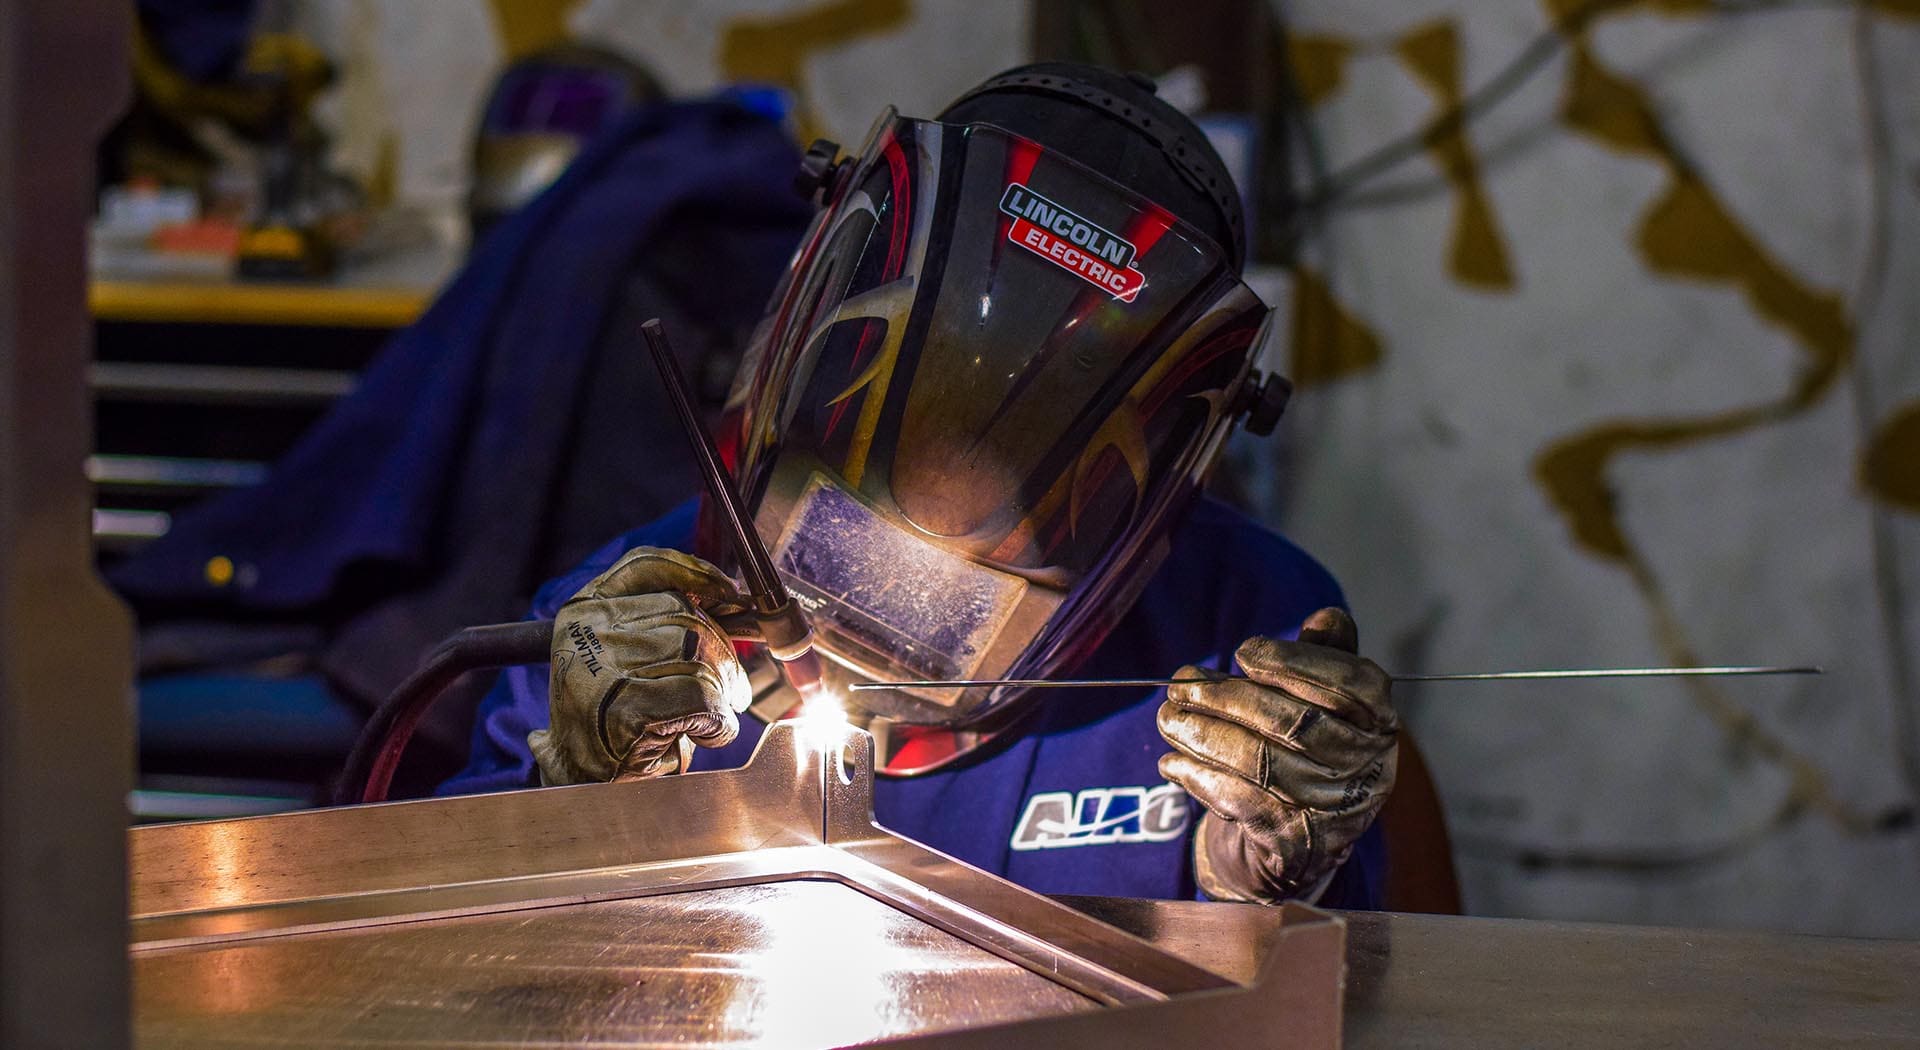 AJAC Youth Apprentice welding on the job